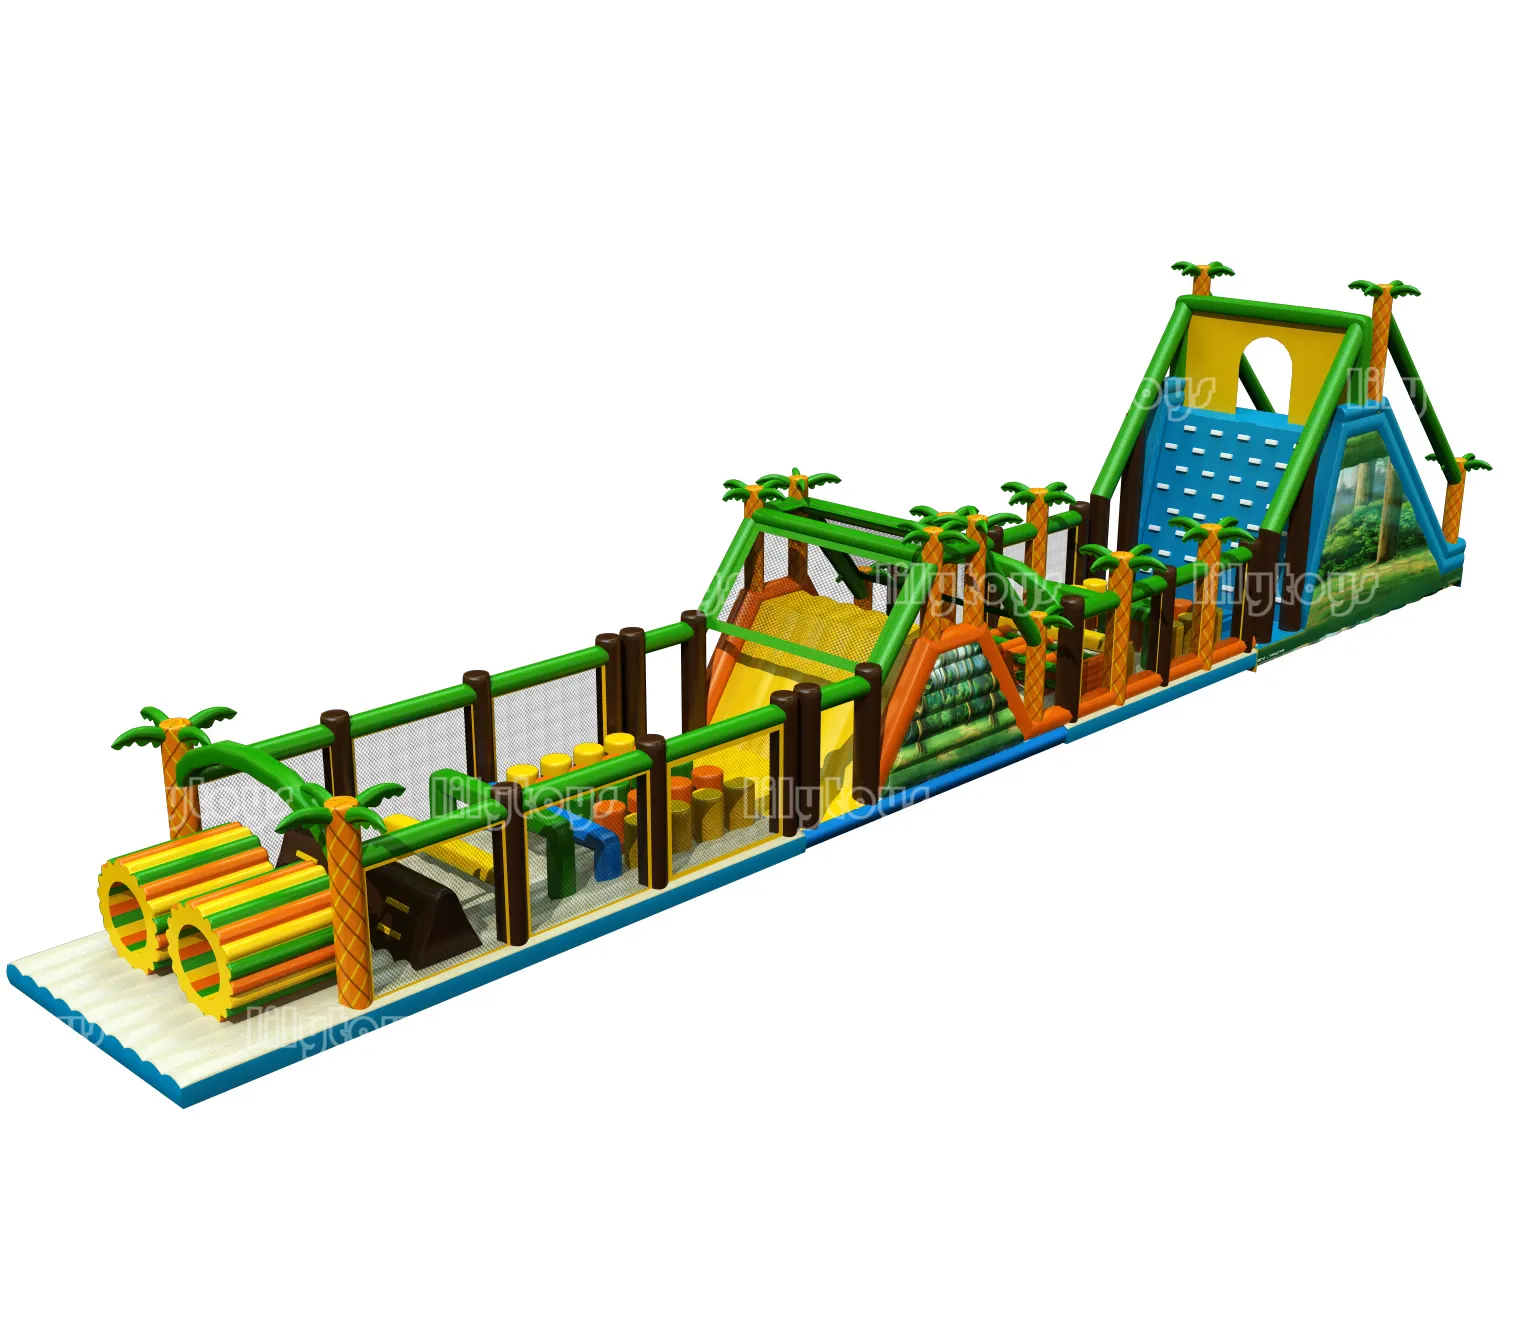 Lilytoys exciting outdoor toys games giant inflatable obstacle course for kids, inflatable obstacle for commercial use